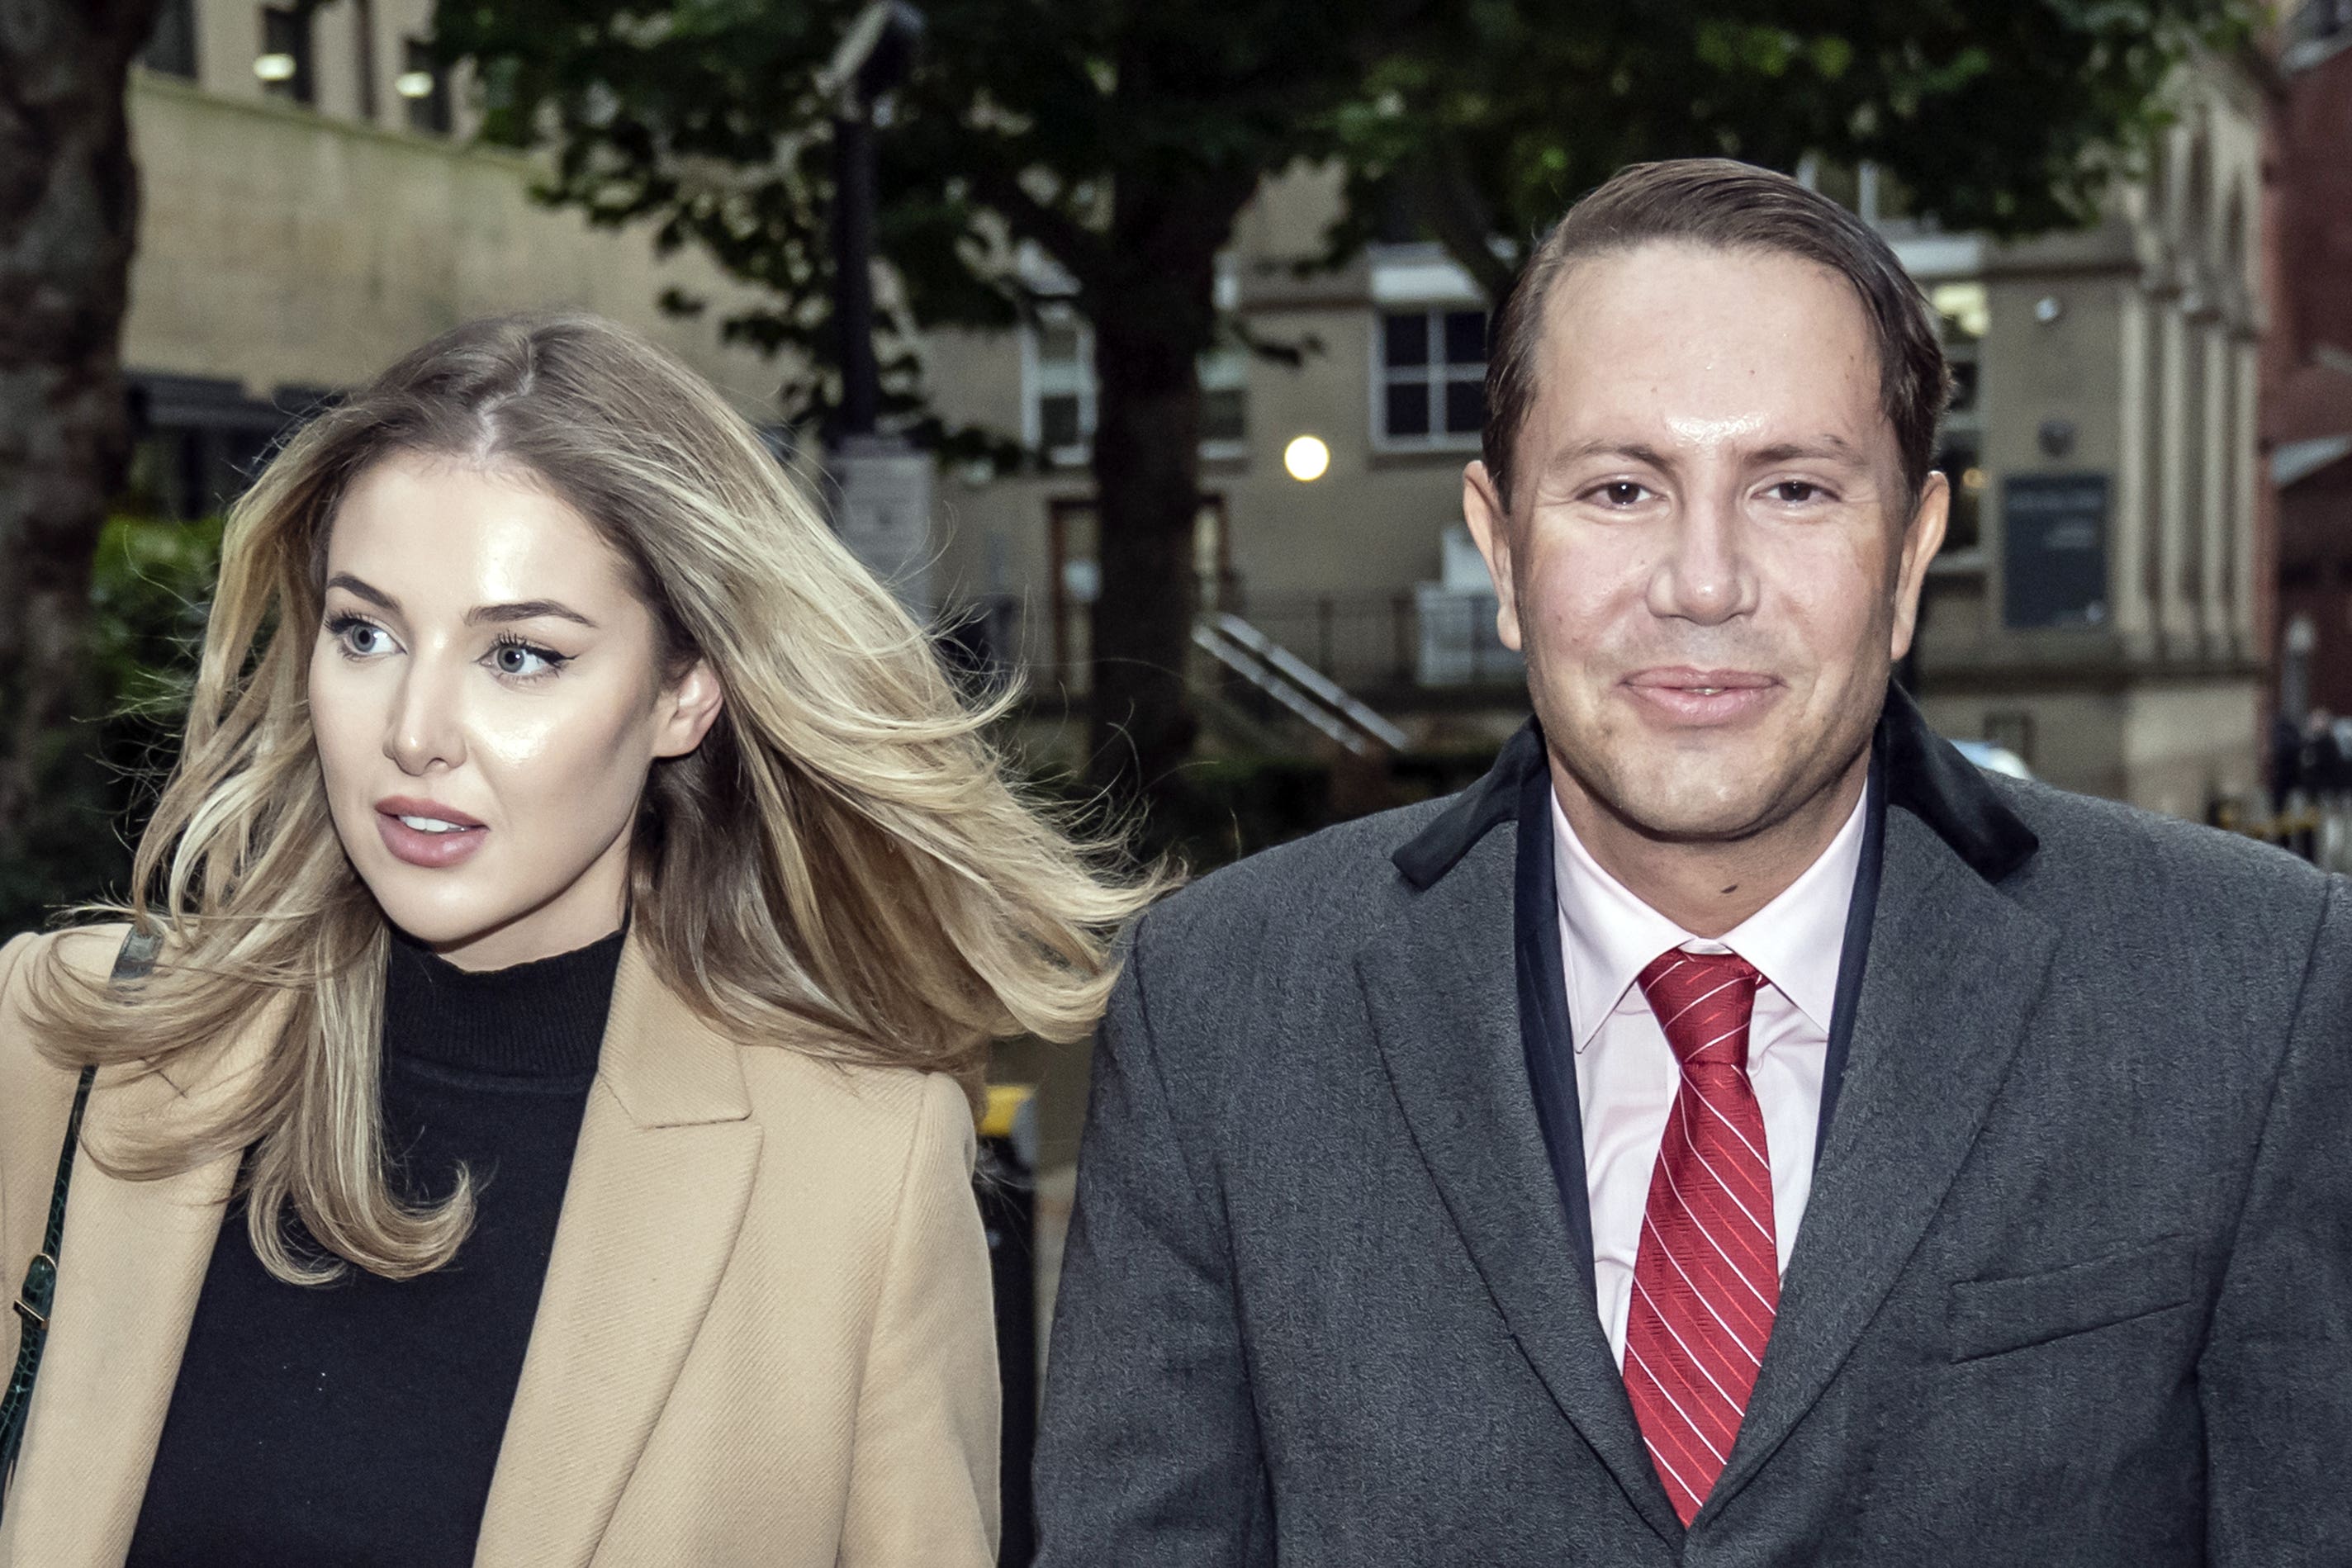 James Stunt, ex-husband of F1 heiress Petra Ecclestone, leaves Cloth Hall Court in Leeds with Helena Robinson, where he is on trial for money laundering charges